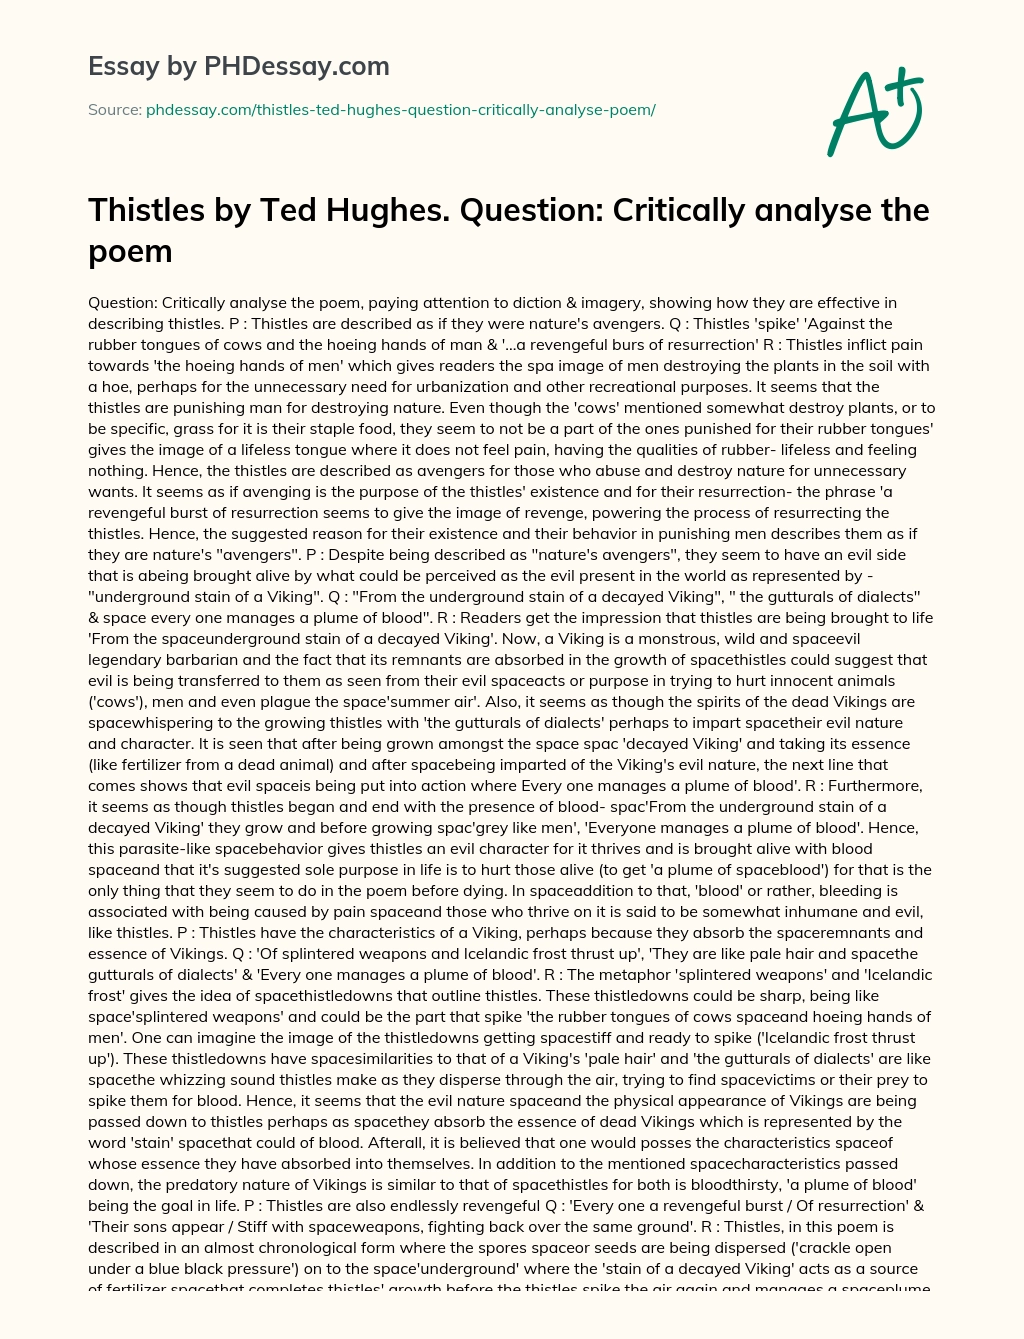 Thistles by Ted Hughes. Question: Critically analyse the poem essay